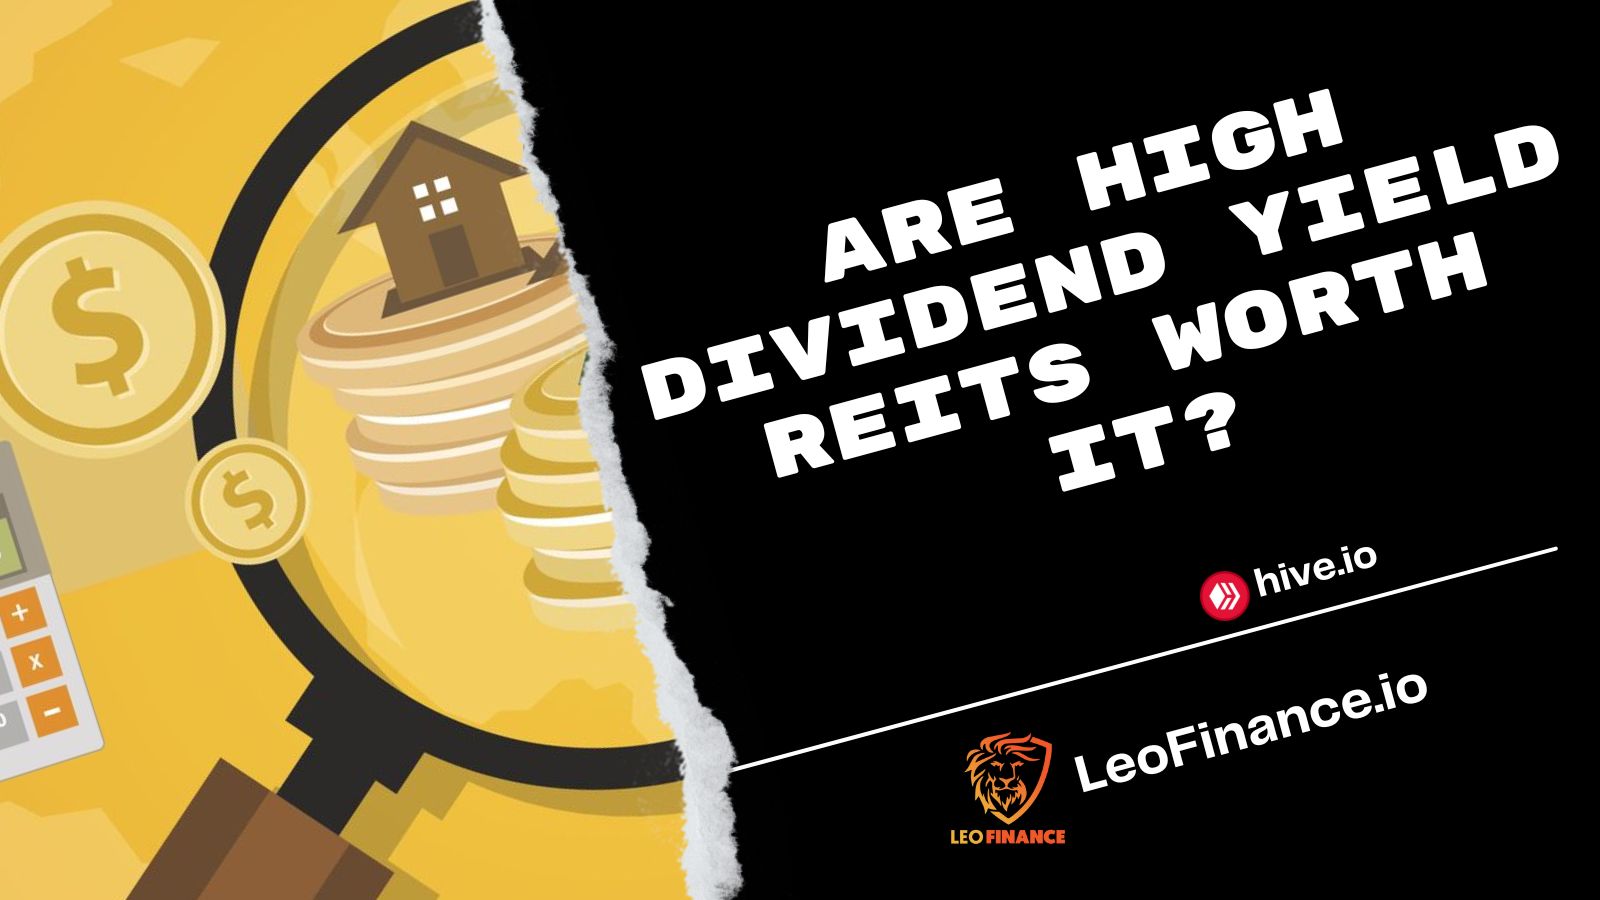 @bitcoinflood/are-high-dividend-yield-reits-worth-it